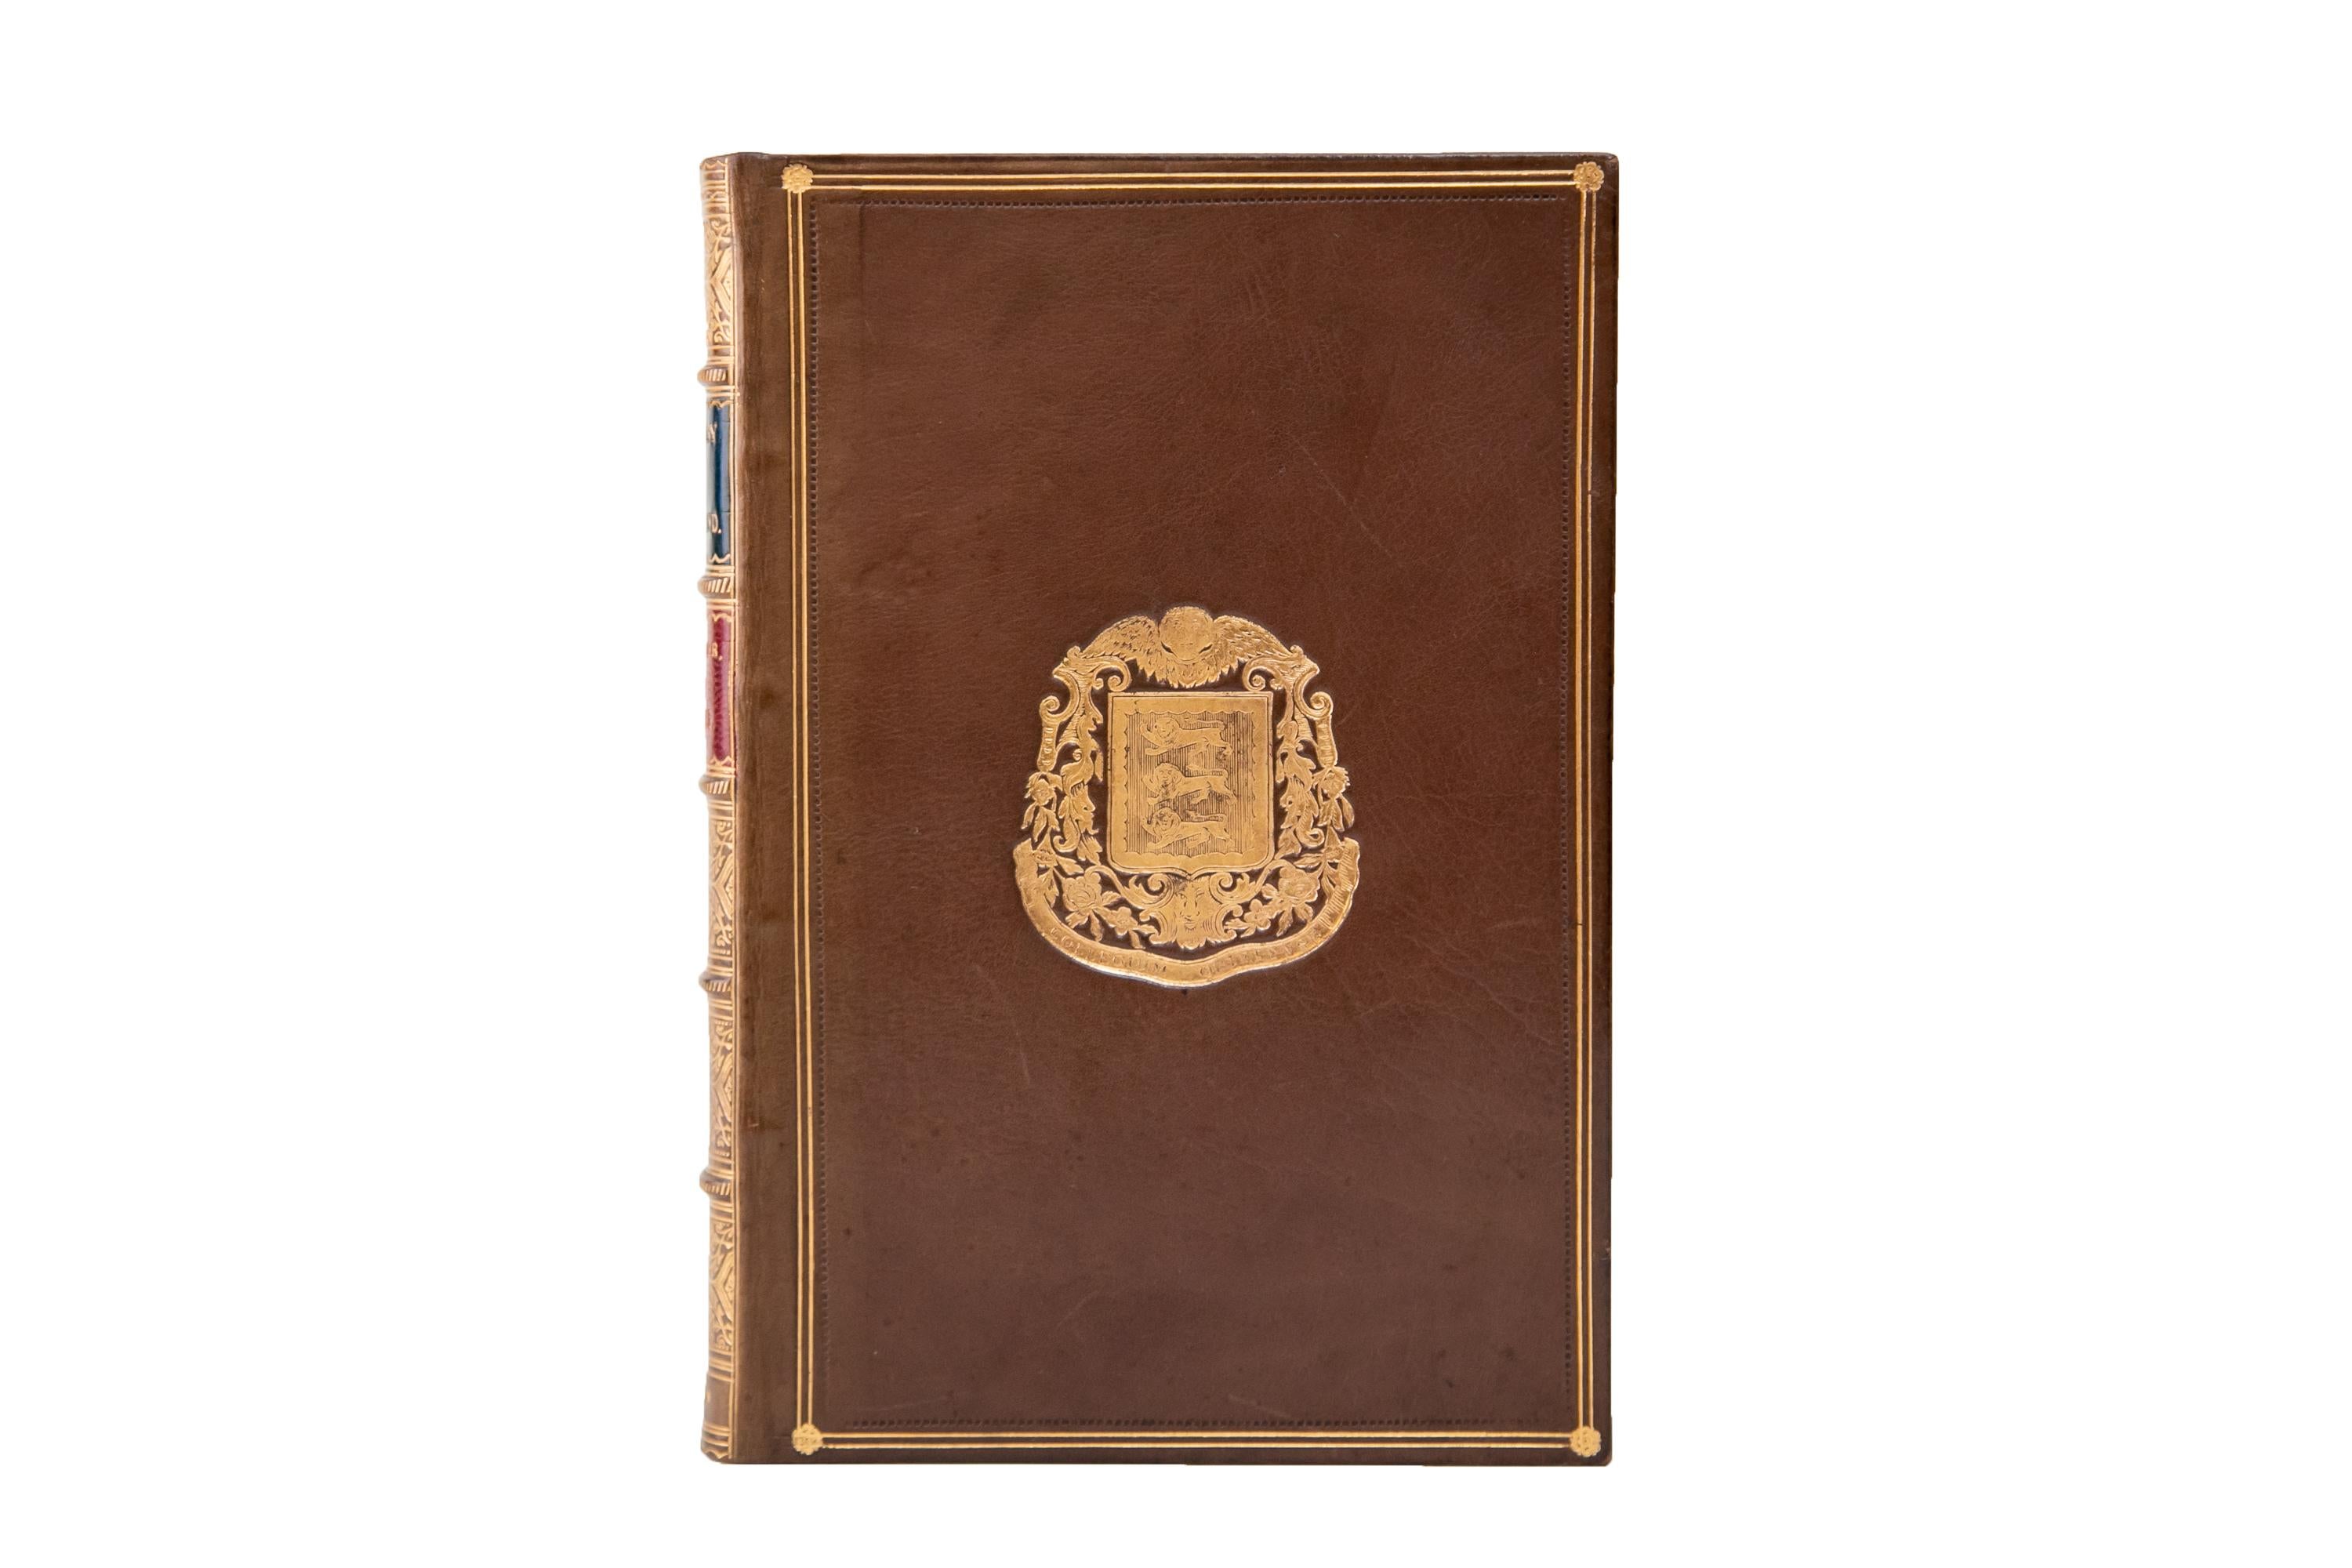 10 Volumes. Samuel R. Gardiner, History of England. Bound in full brown calf with the covers displaying borders, floral corner flourishes, and a central crest, all gilt-tooled. The spines display red and blue morocco labels with raised bands, ornate